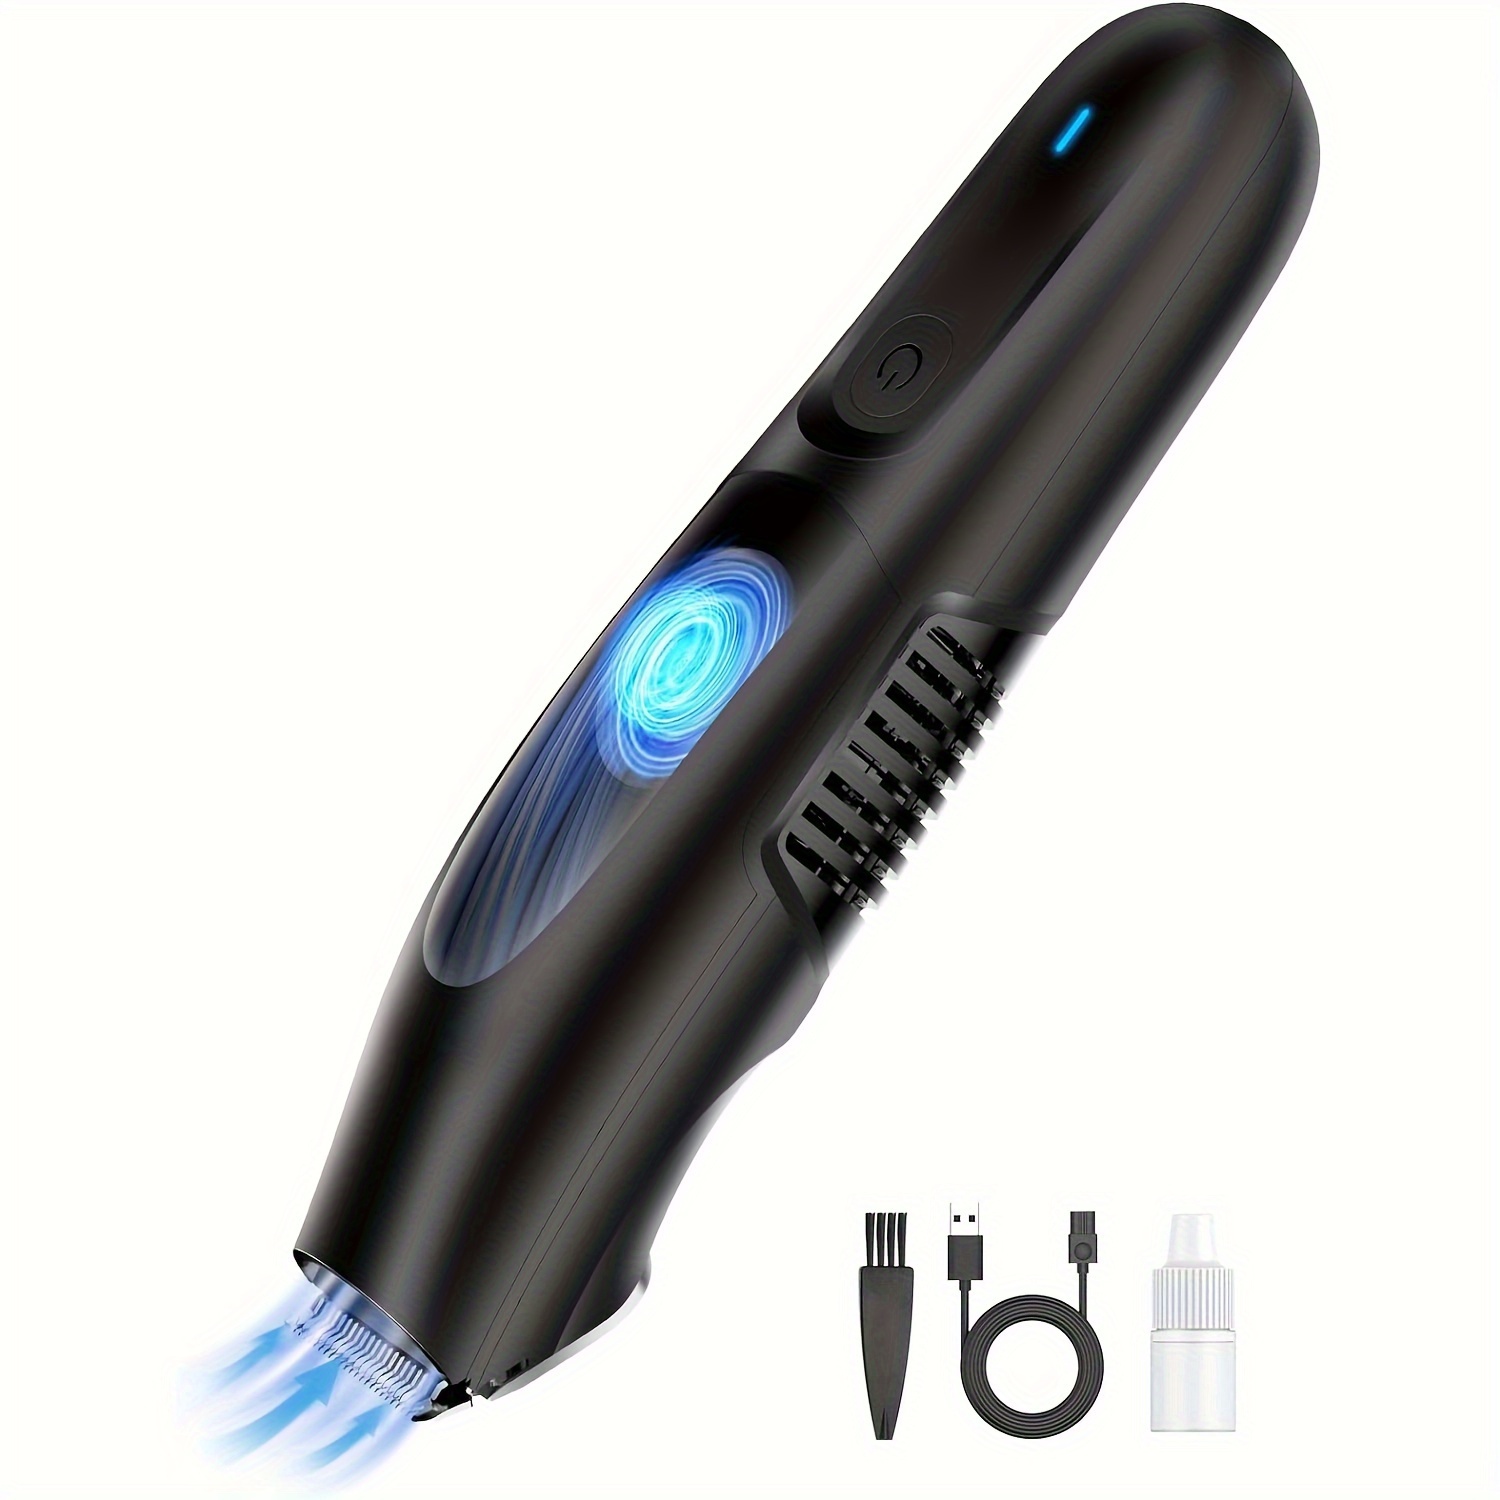 

Body Hair Trimmer, Electric Vacuum Hair Suction Trimmer, Electric Shaver, Wet/dry, Rechargeable Body Hair Groomer, Pubic Hair Hygiene Razor, Chest Hair Trimmer, Gifts For Men, Father's Day Gift